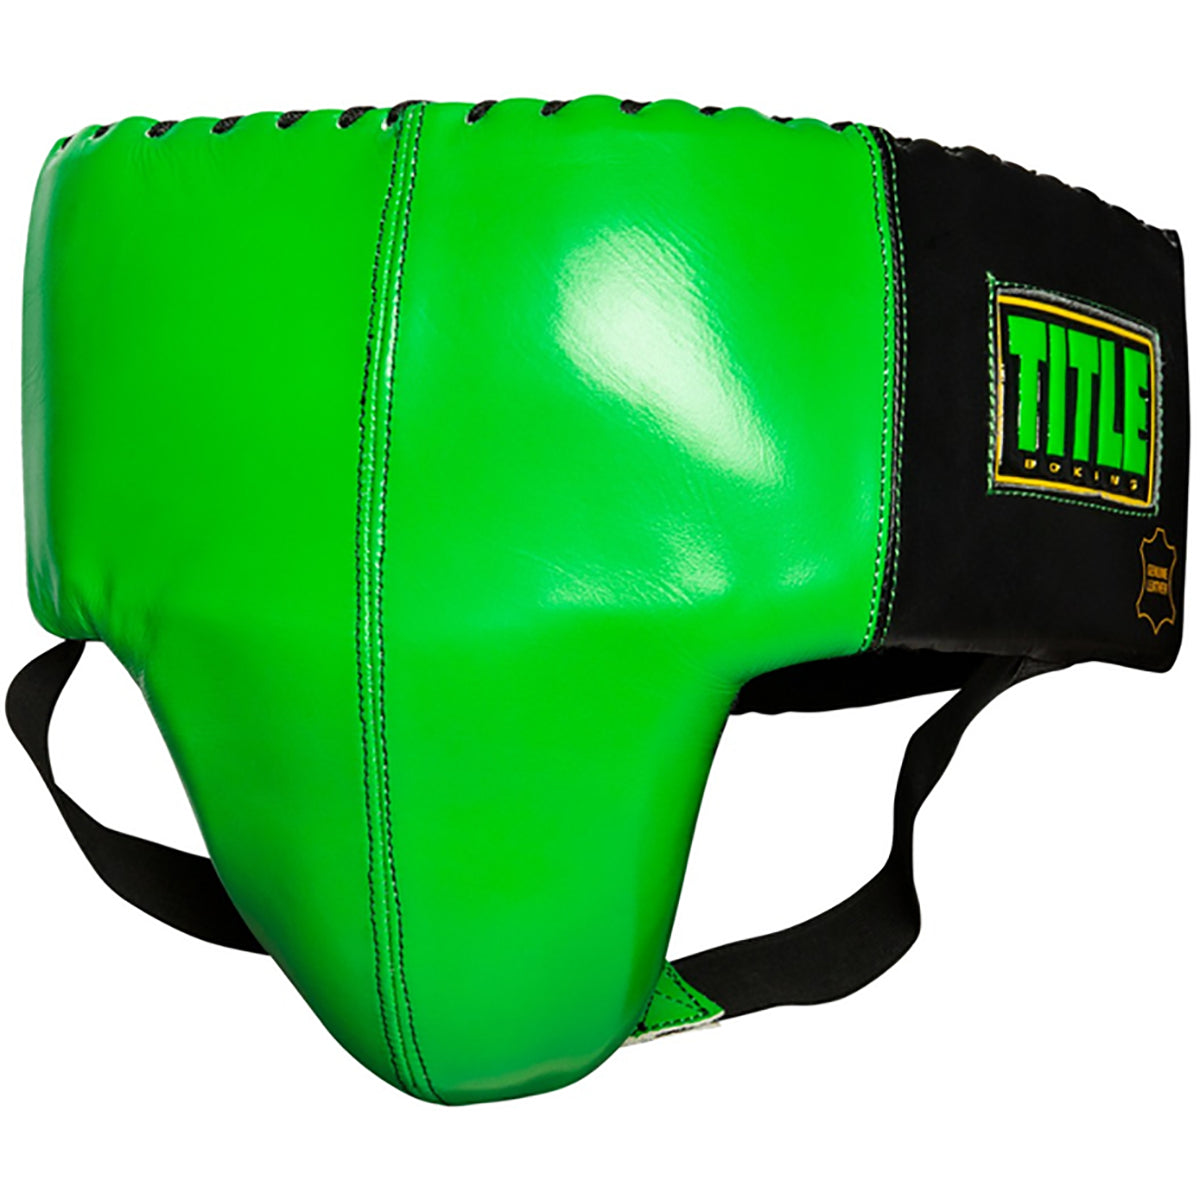 Title Boxing WBC Groin Protector - Large - Green/Black Title Boxing